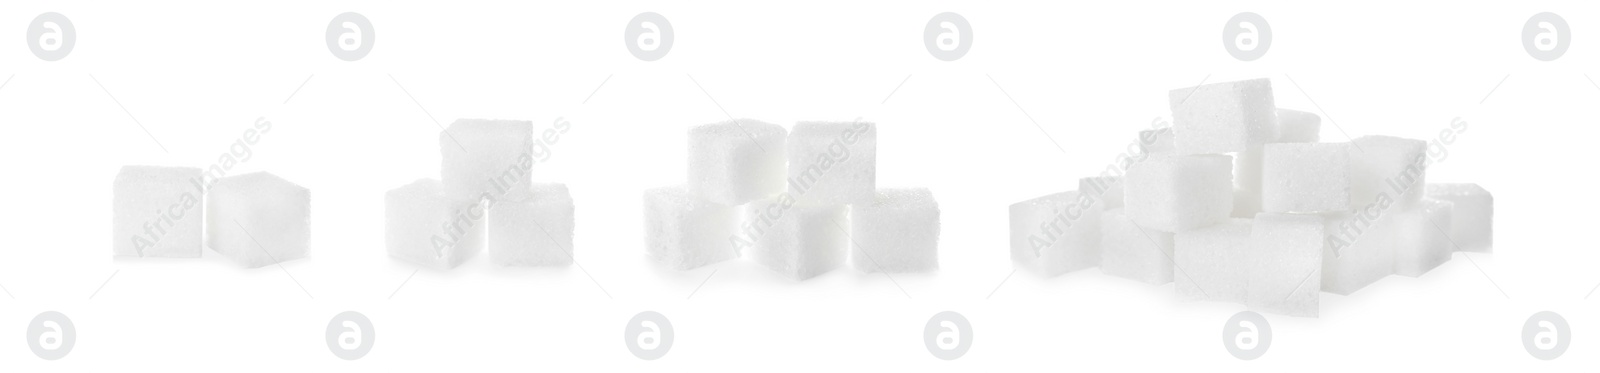 Image of Set with refined sugar cubes on white background. Banner design  